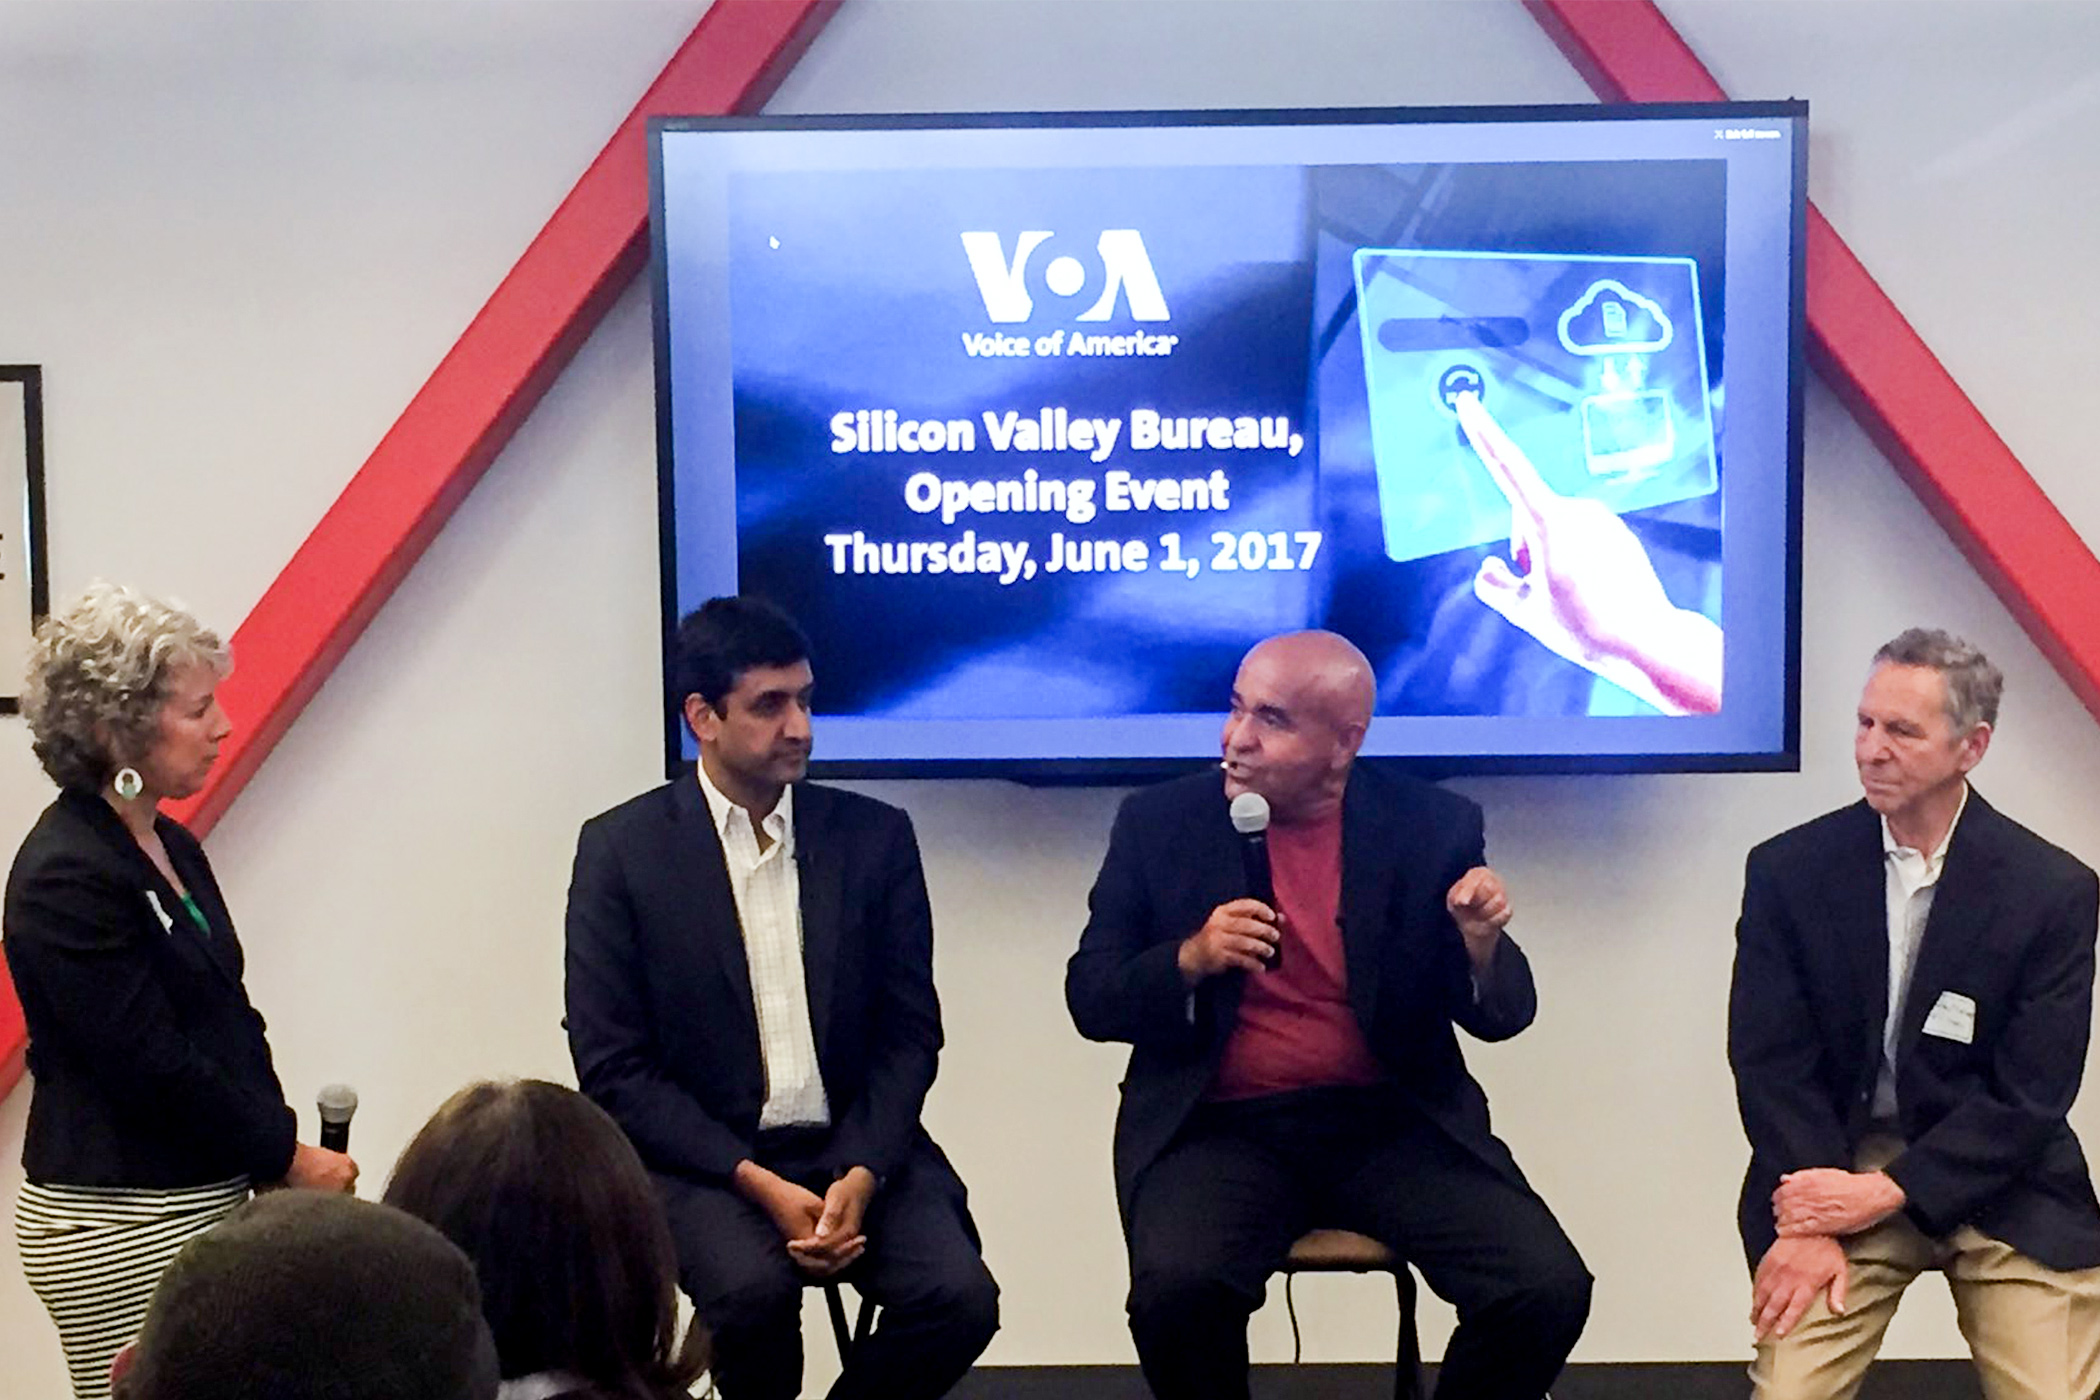 Entrepreneurs, thought leaders debate high tech immigration as VOA opens Silicon Valley Bureau